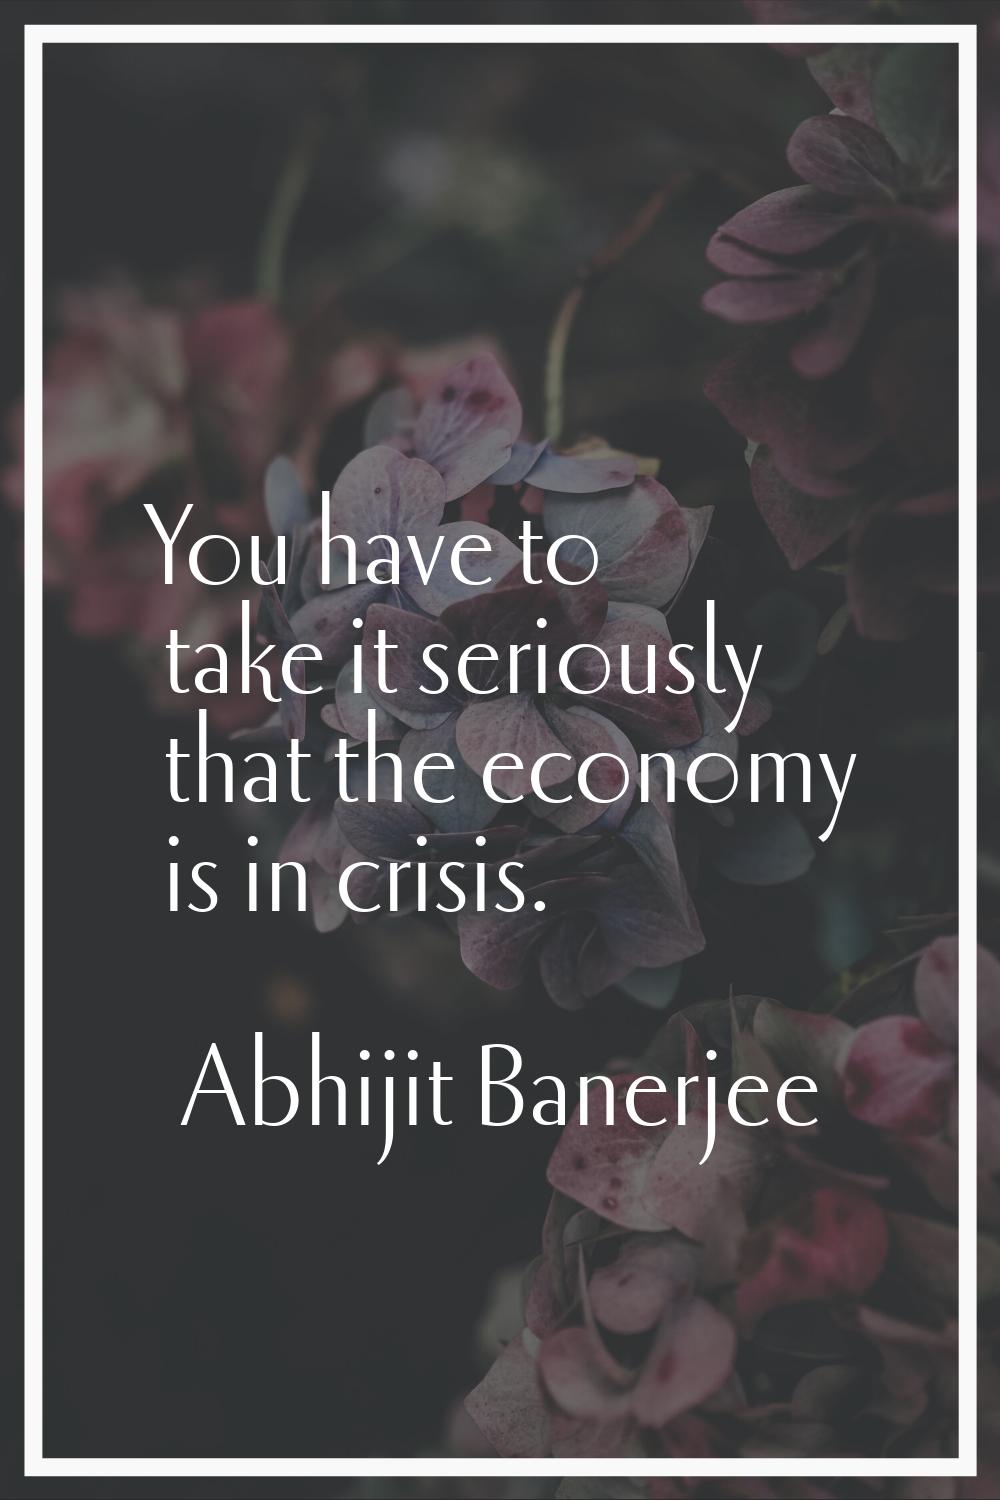 You have to take it seriously that the economy is in crisis.